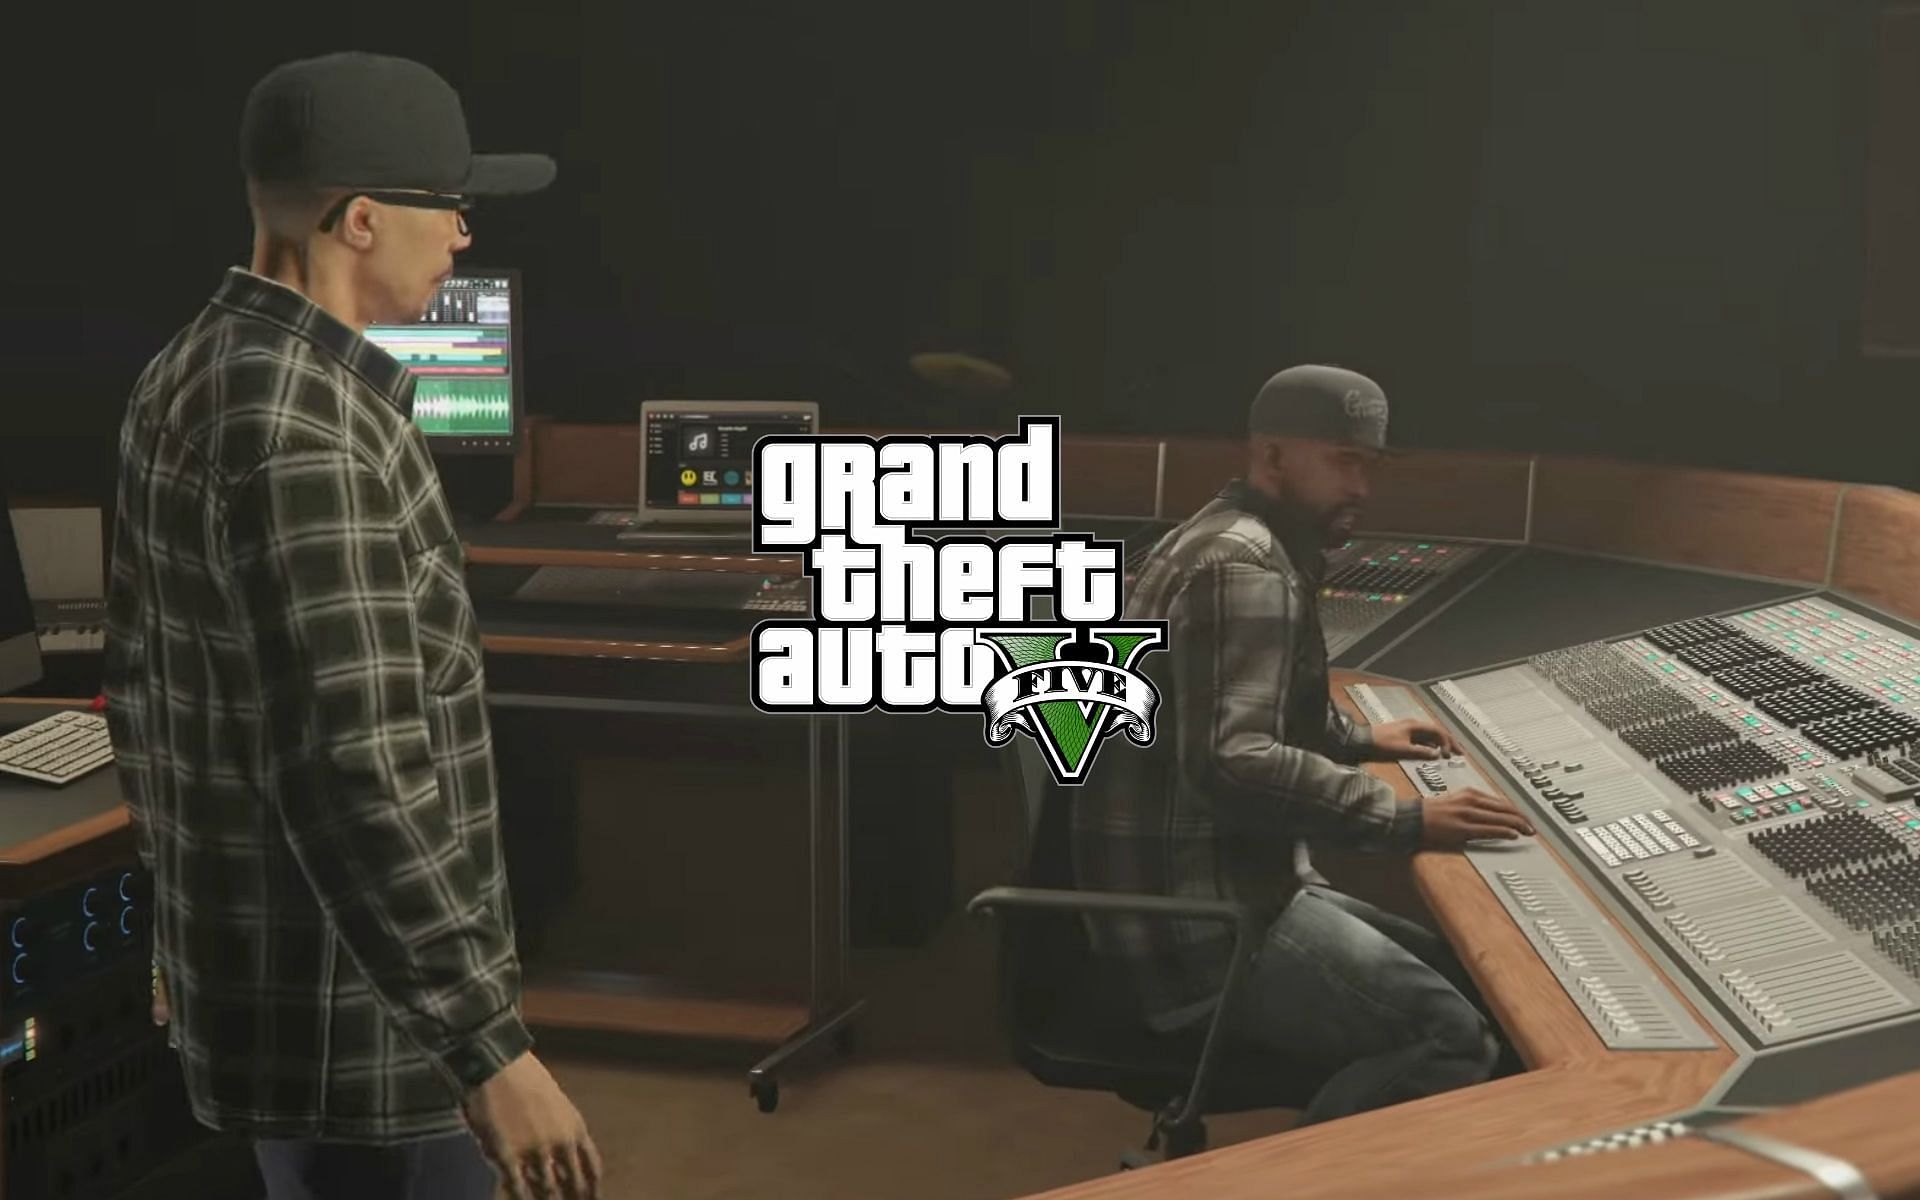 The tracklist in GTA 5 and its online counterpart is extensive (Image via Rockstar Games)